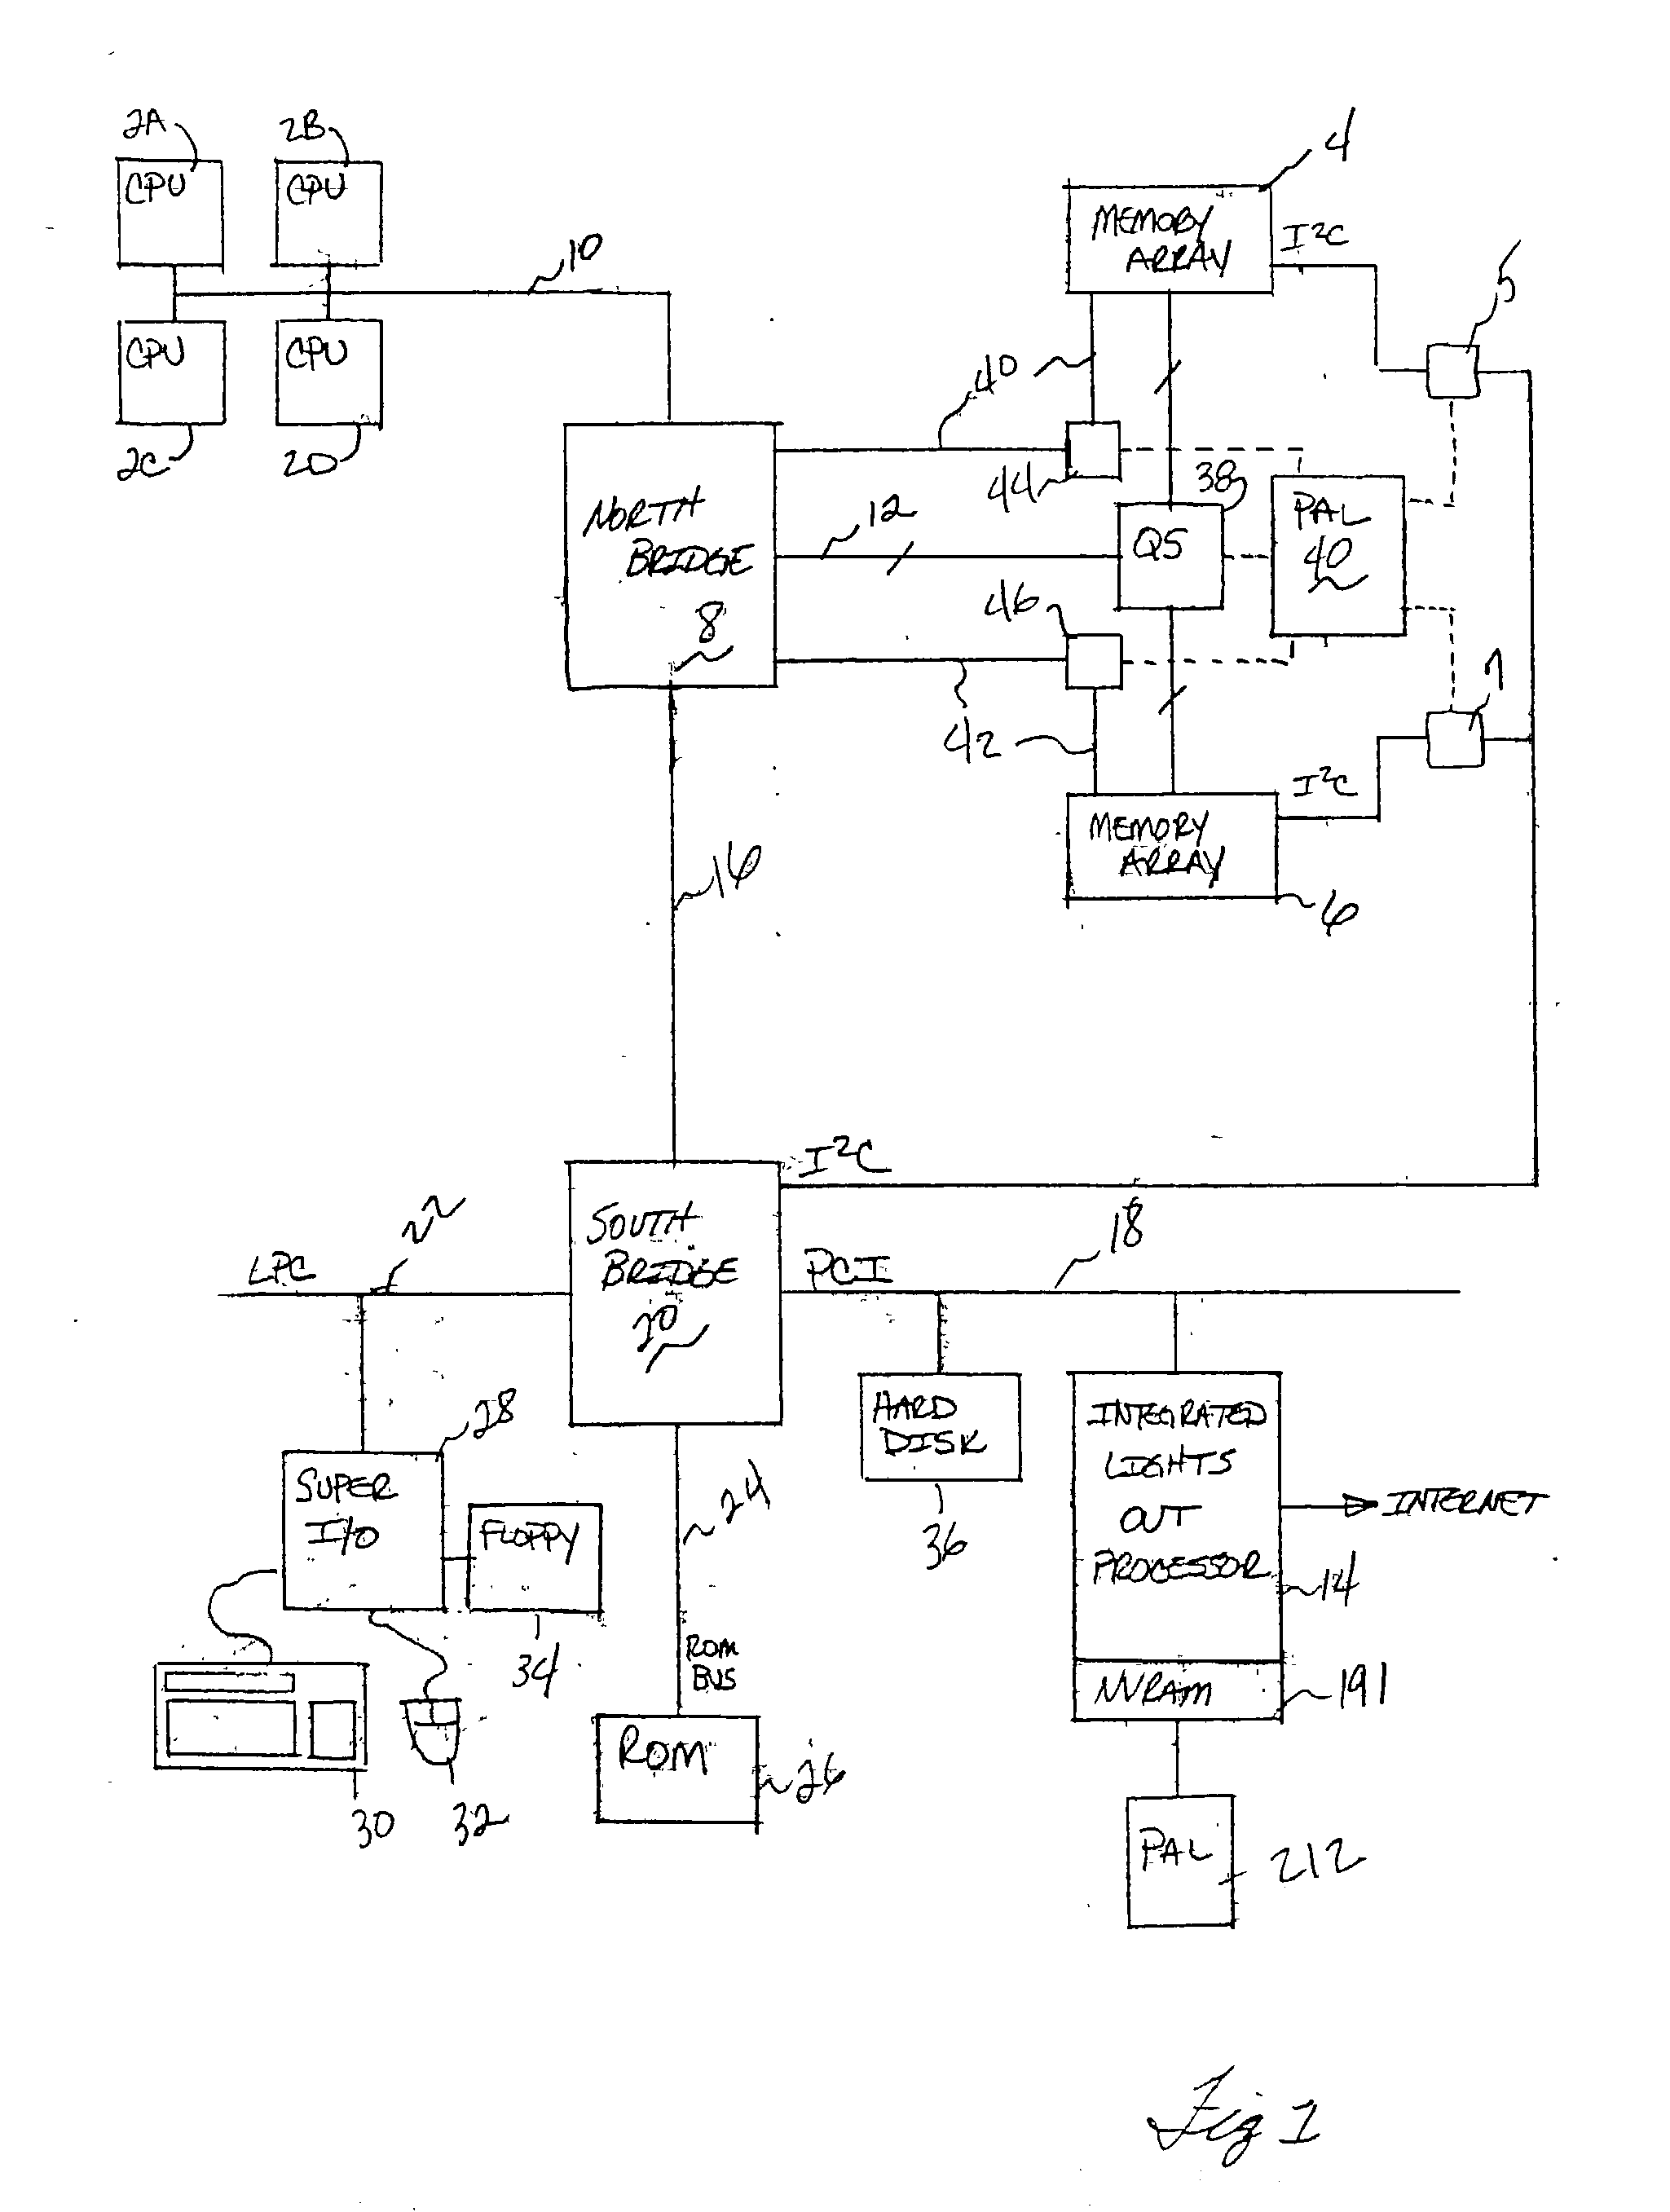 Computer system architecture with hot pluggable main memory boards